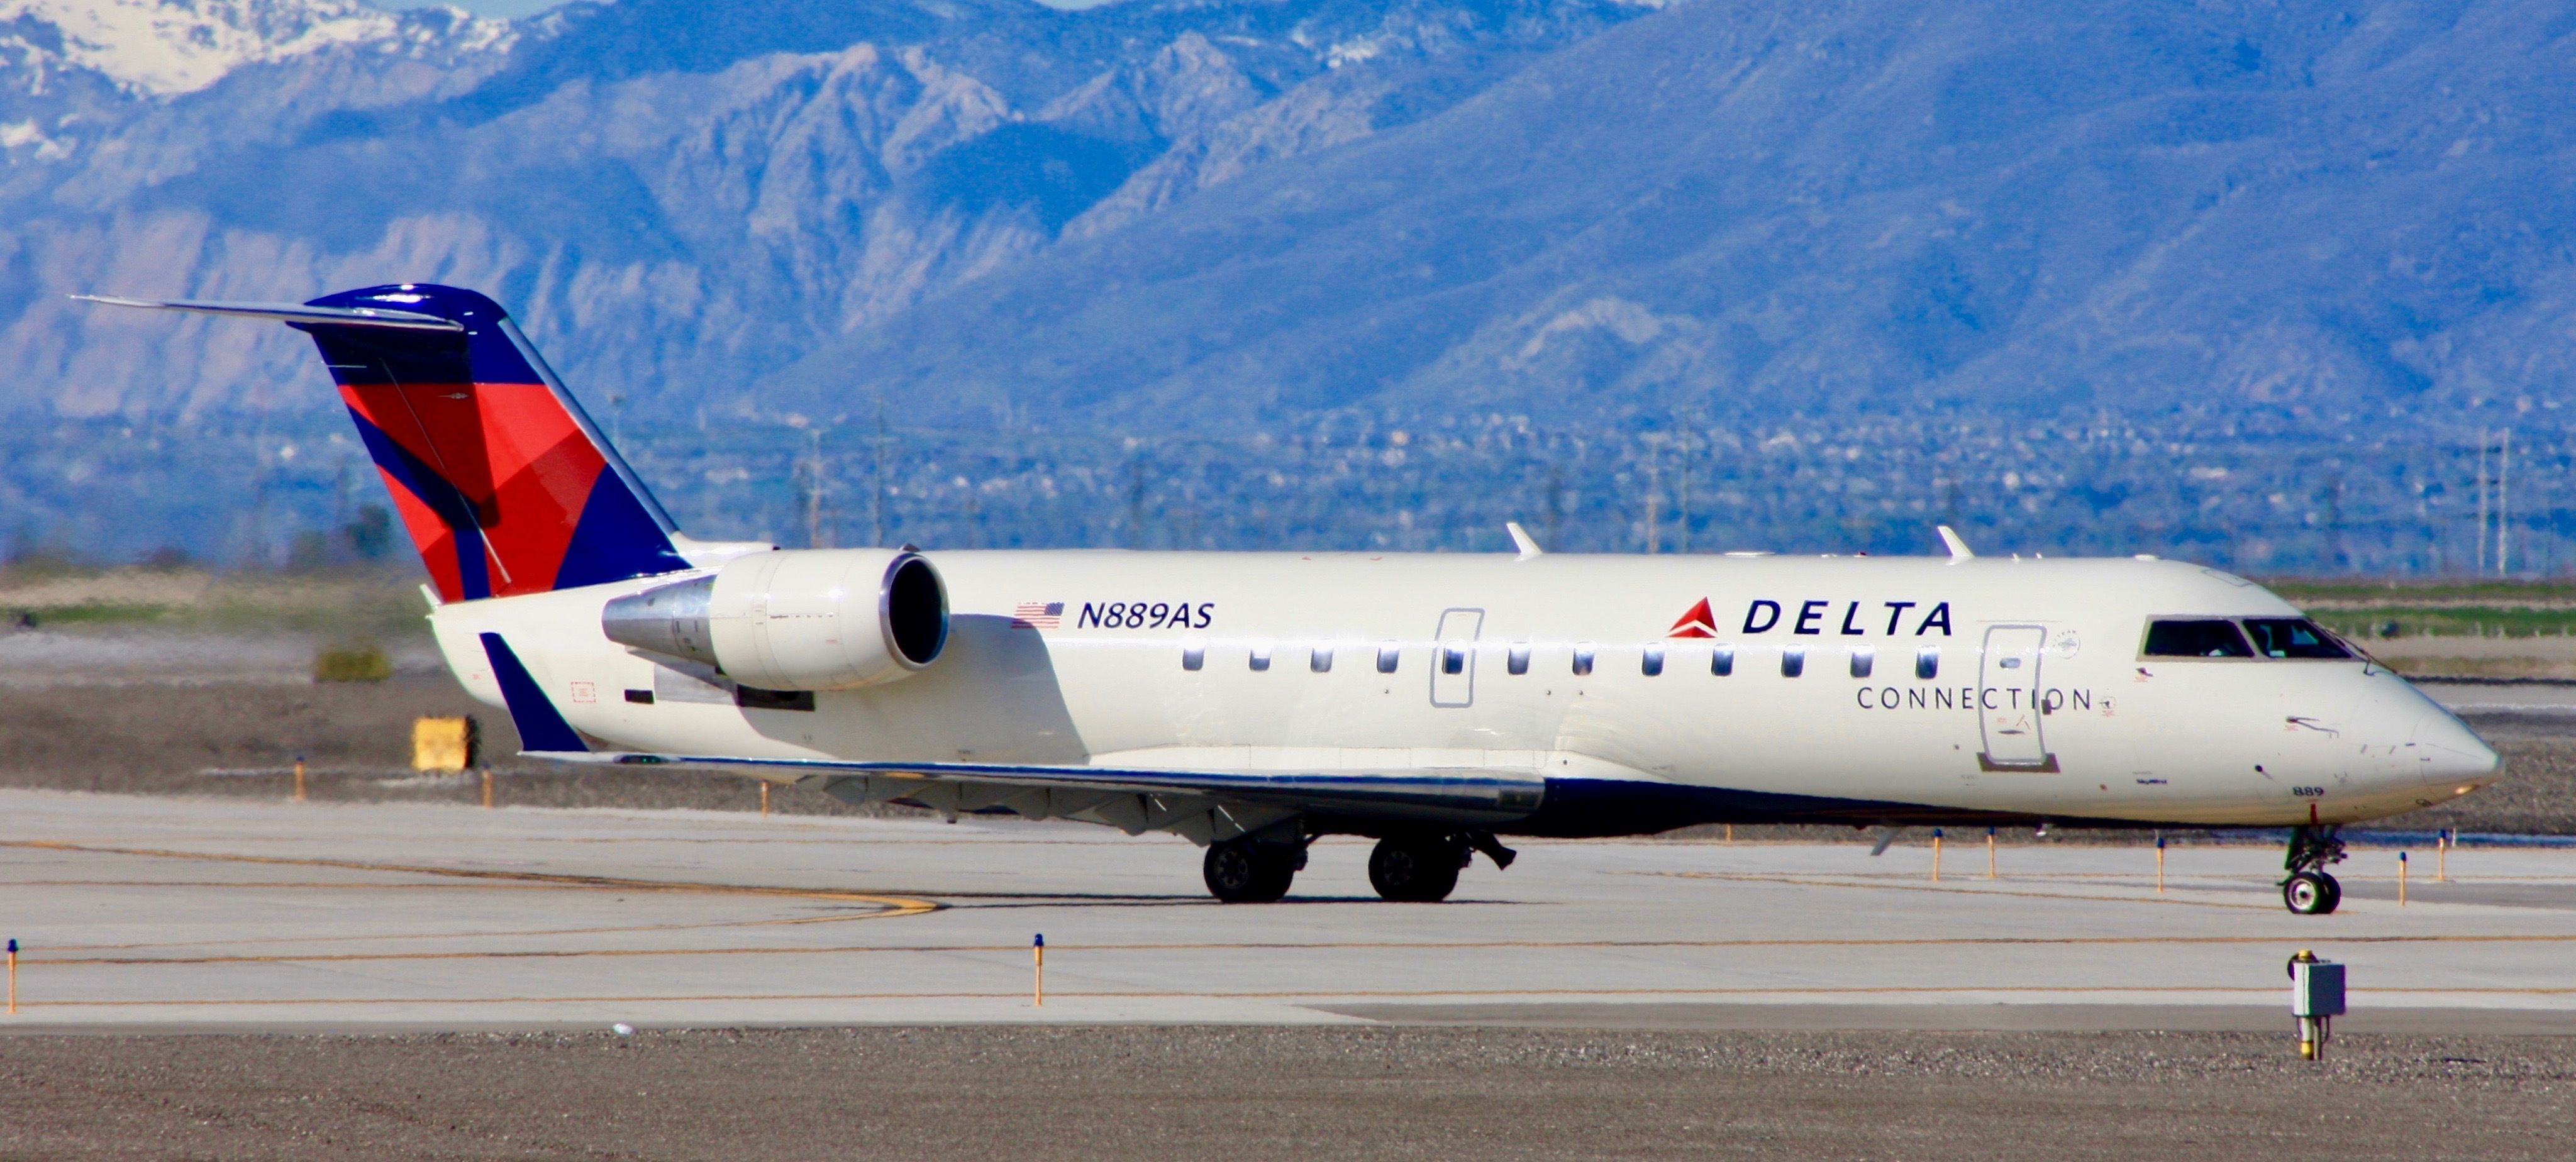 Delta Air Lines Bombardier CRJ 200 on taxiway 